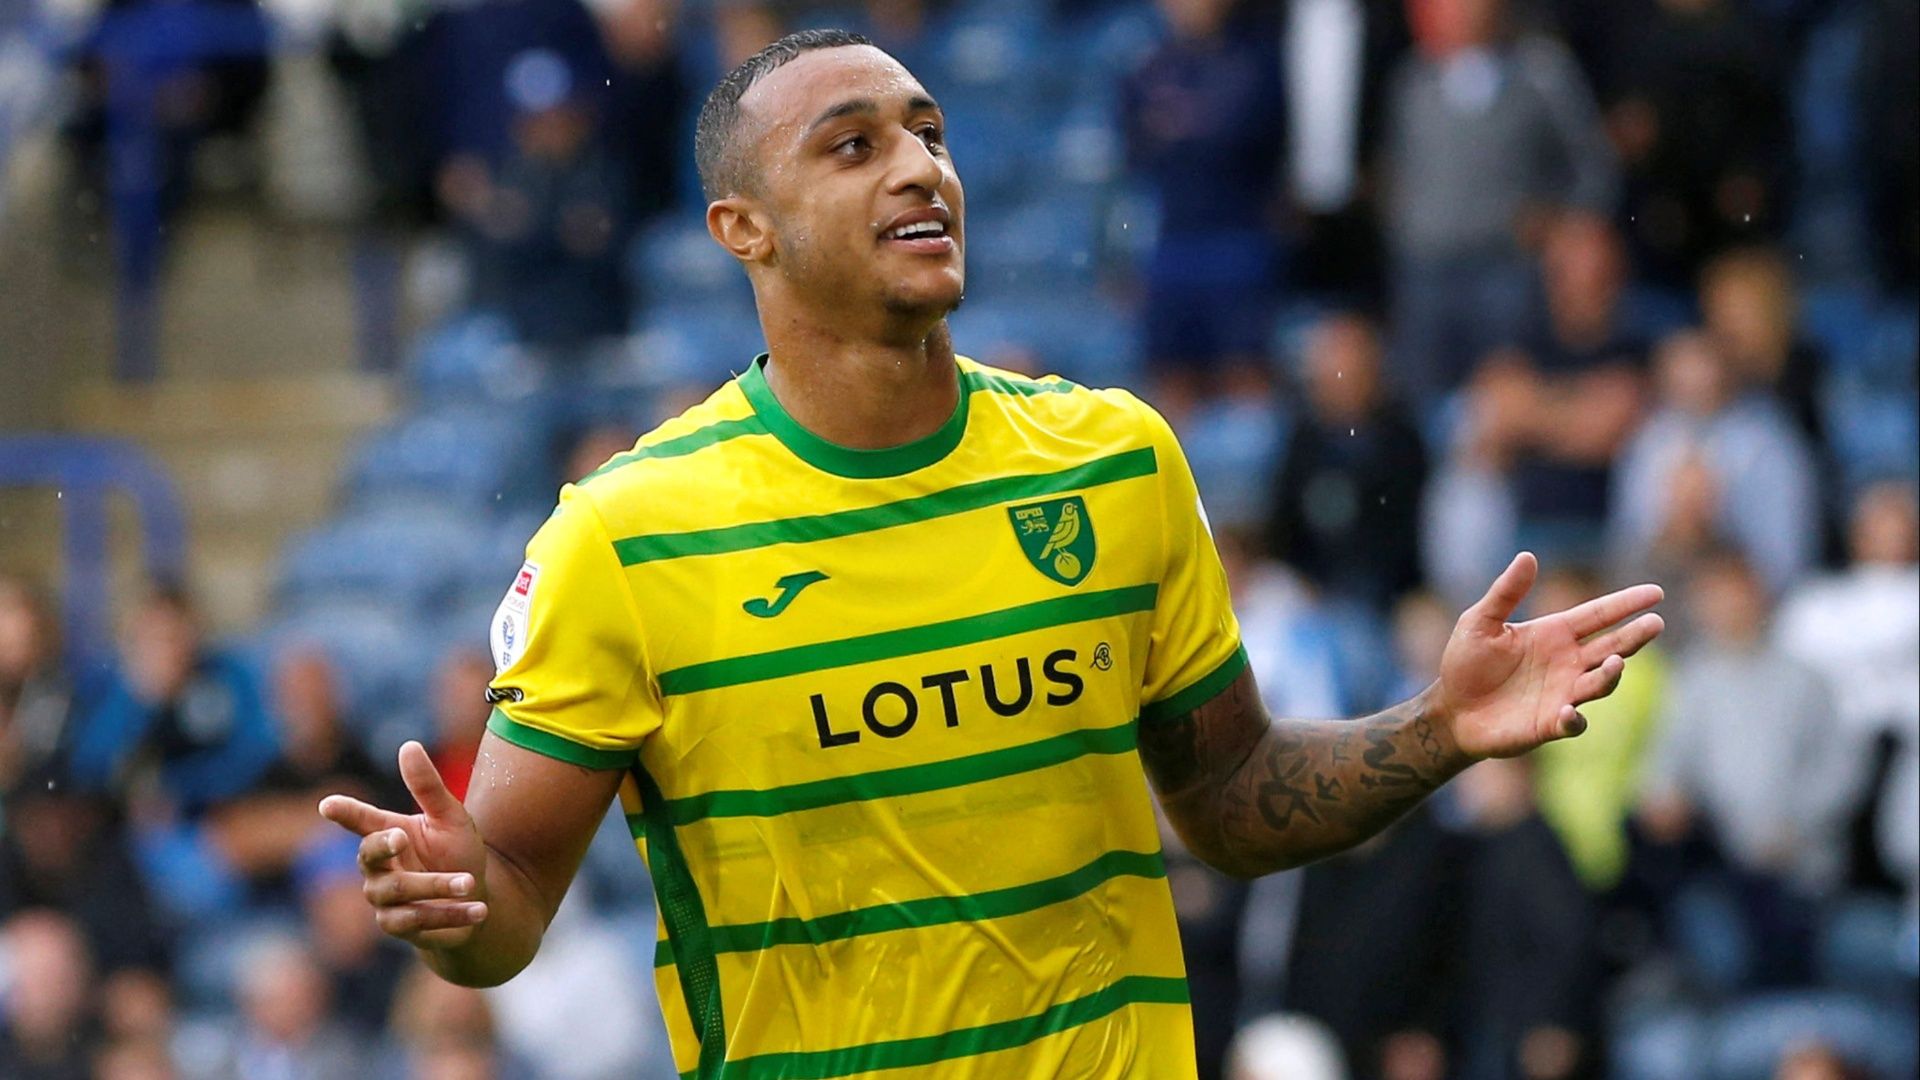 Celtic poised to finalise late transfer swoop for Norwich City player